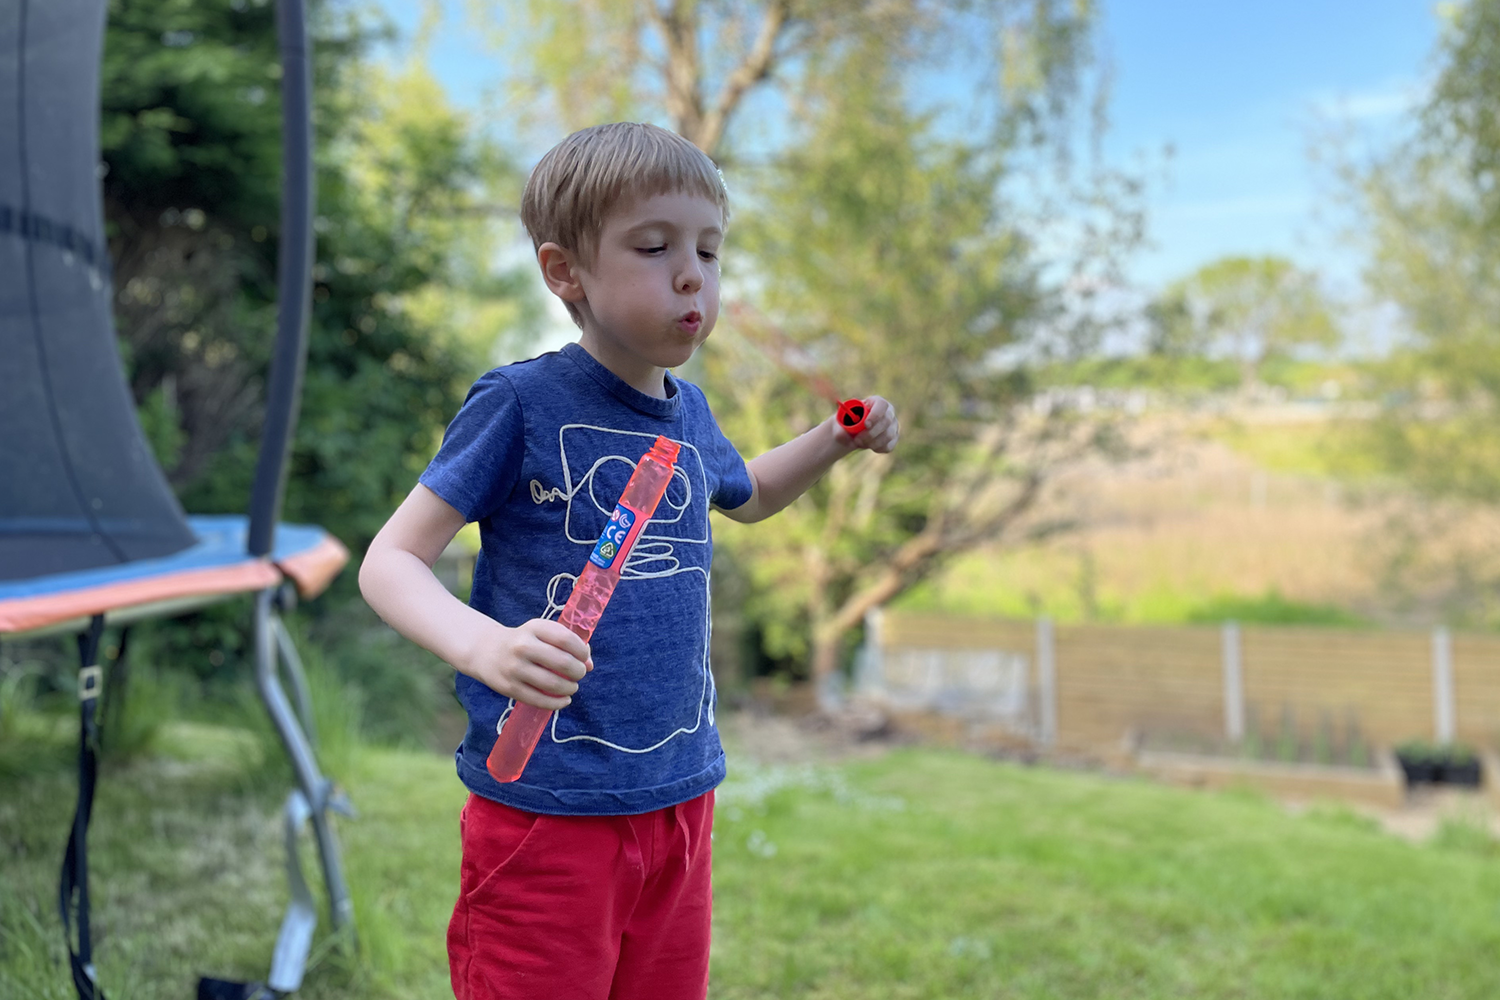 Gabe blowing bubbles in the garden